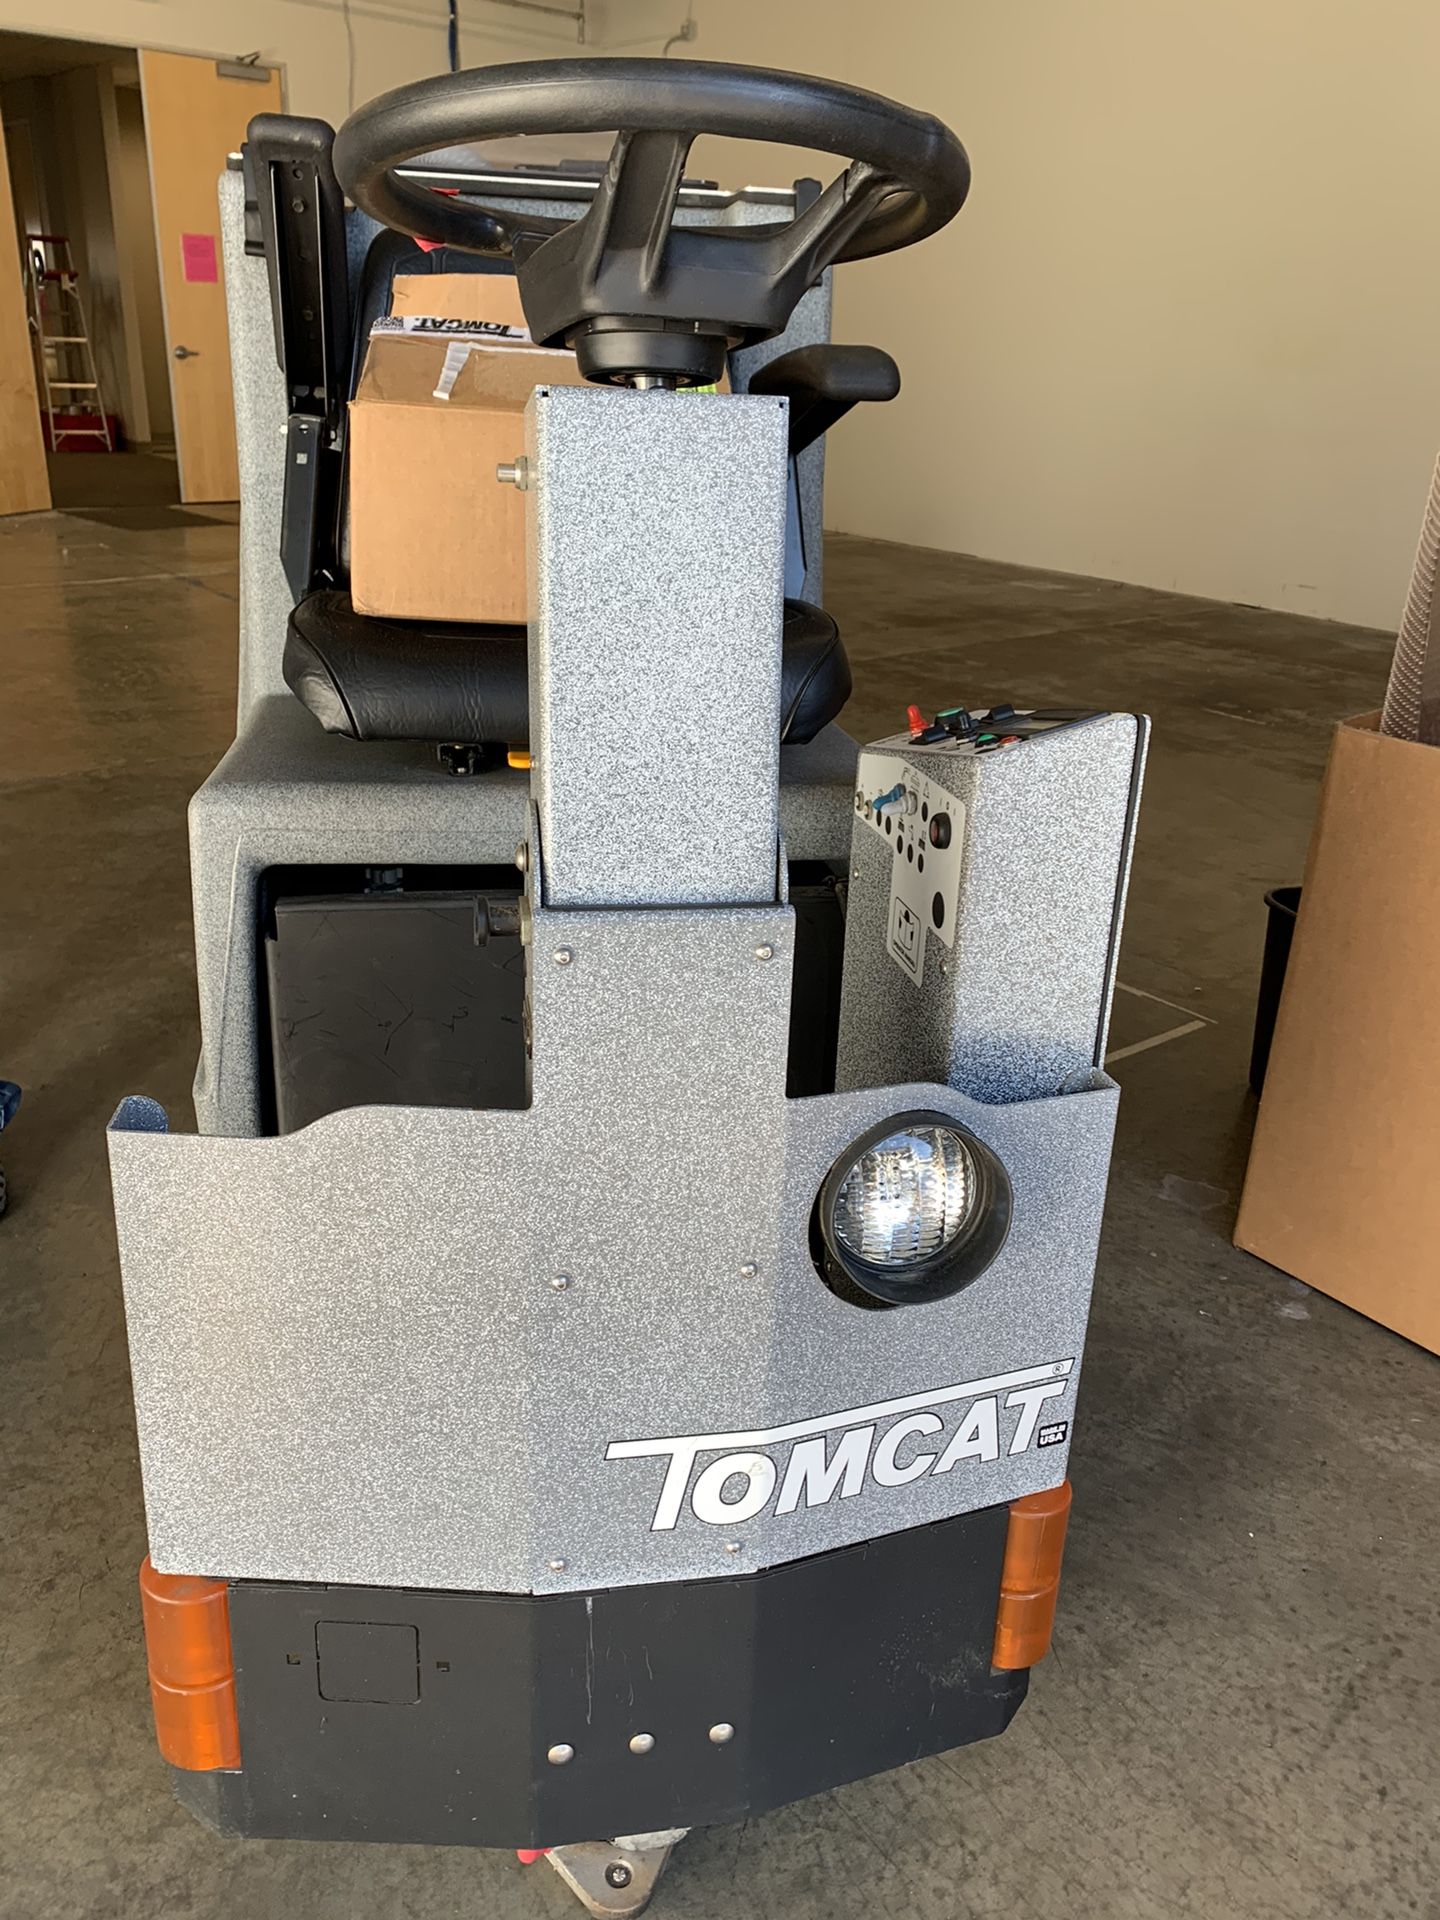 Tomcat Model:250 30” Disk Rider Floor Scrubber with Extra Accessories